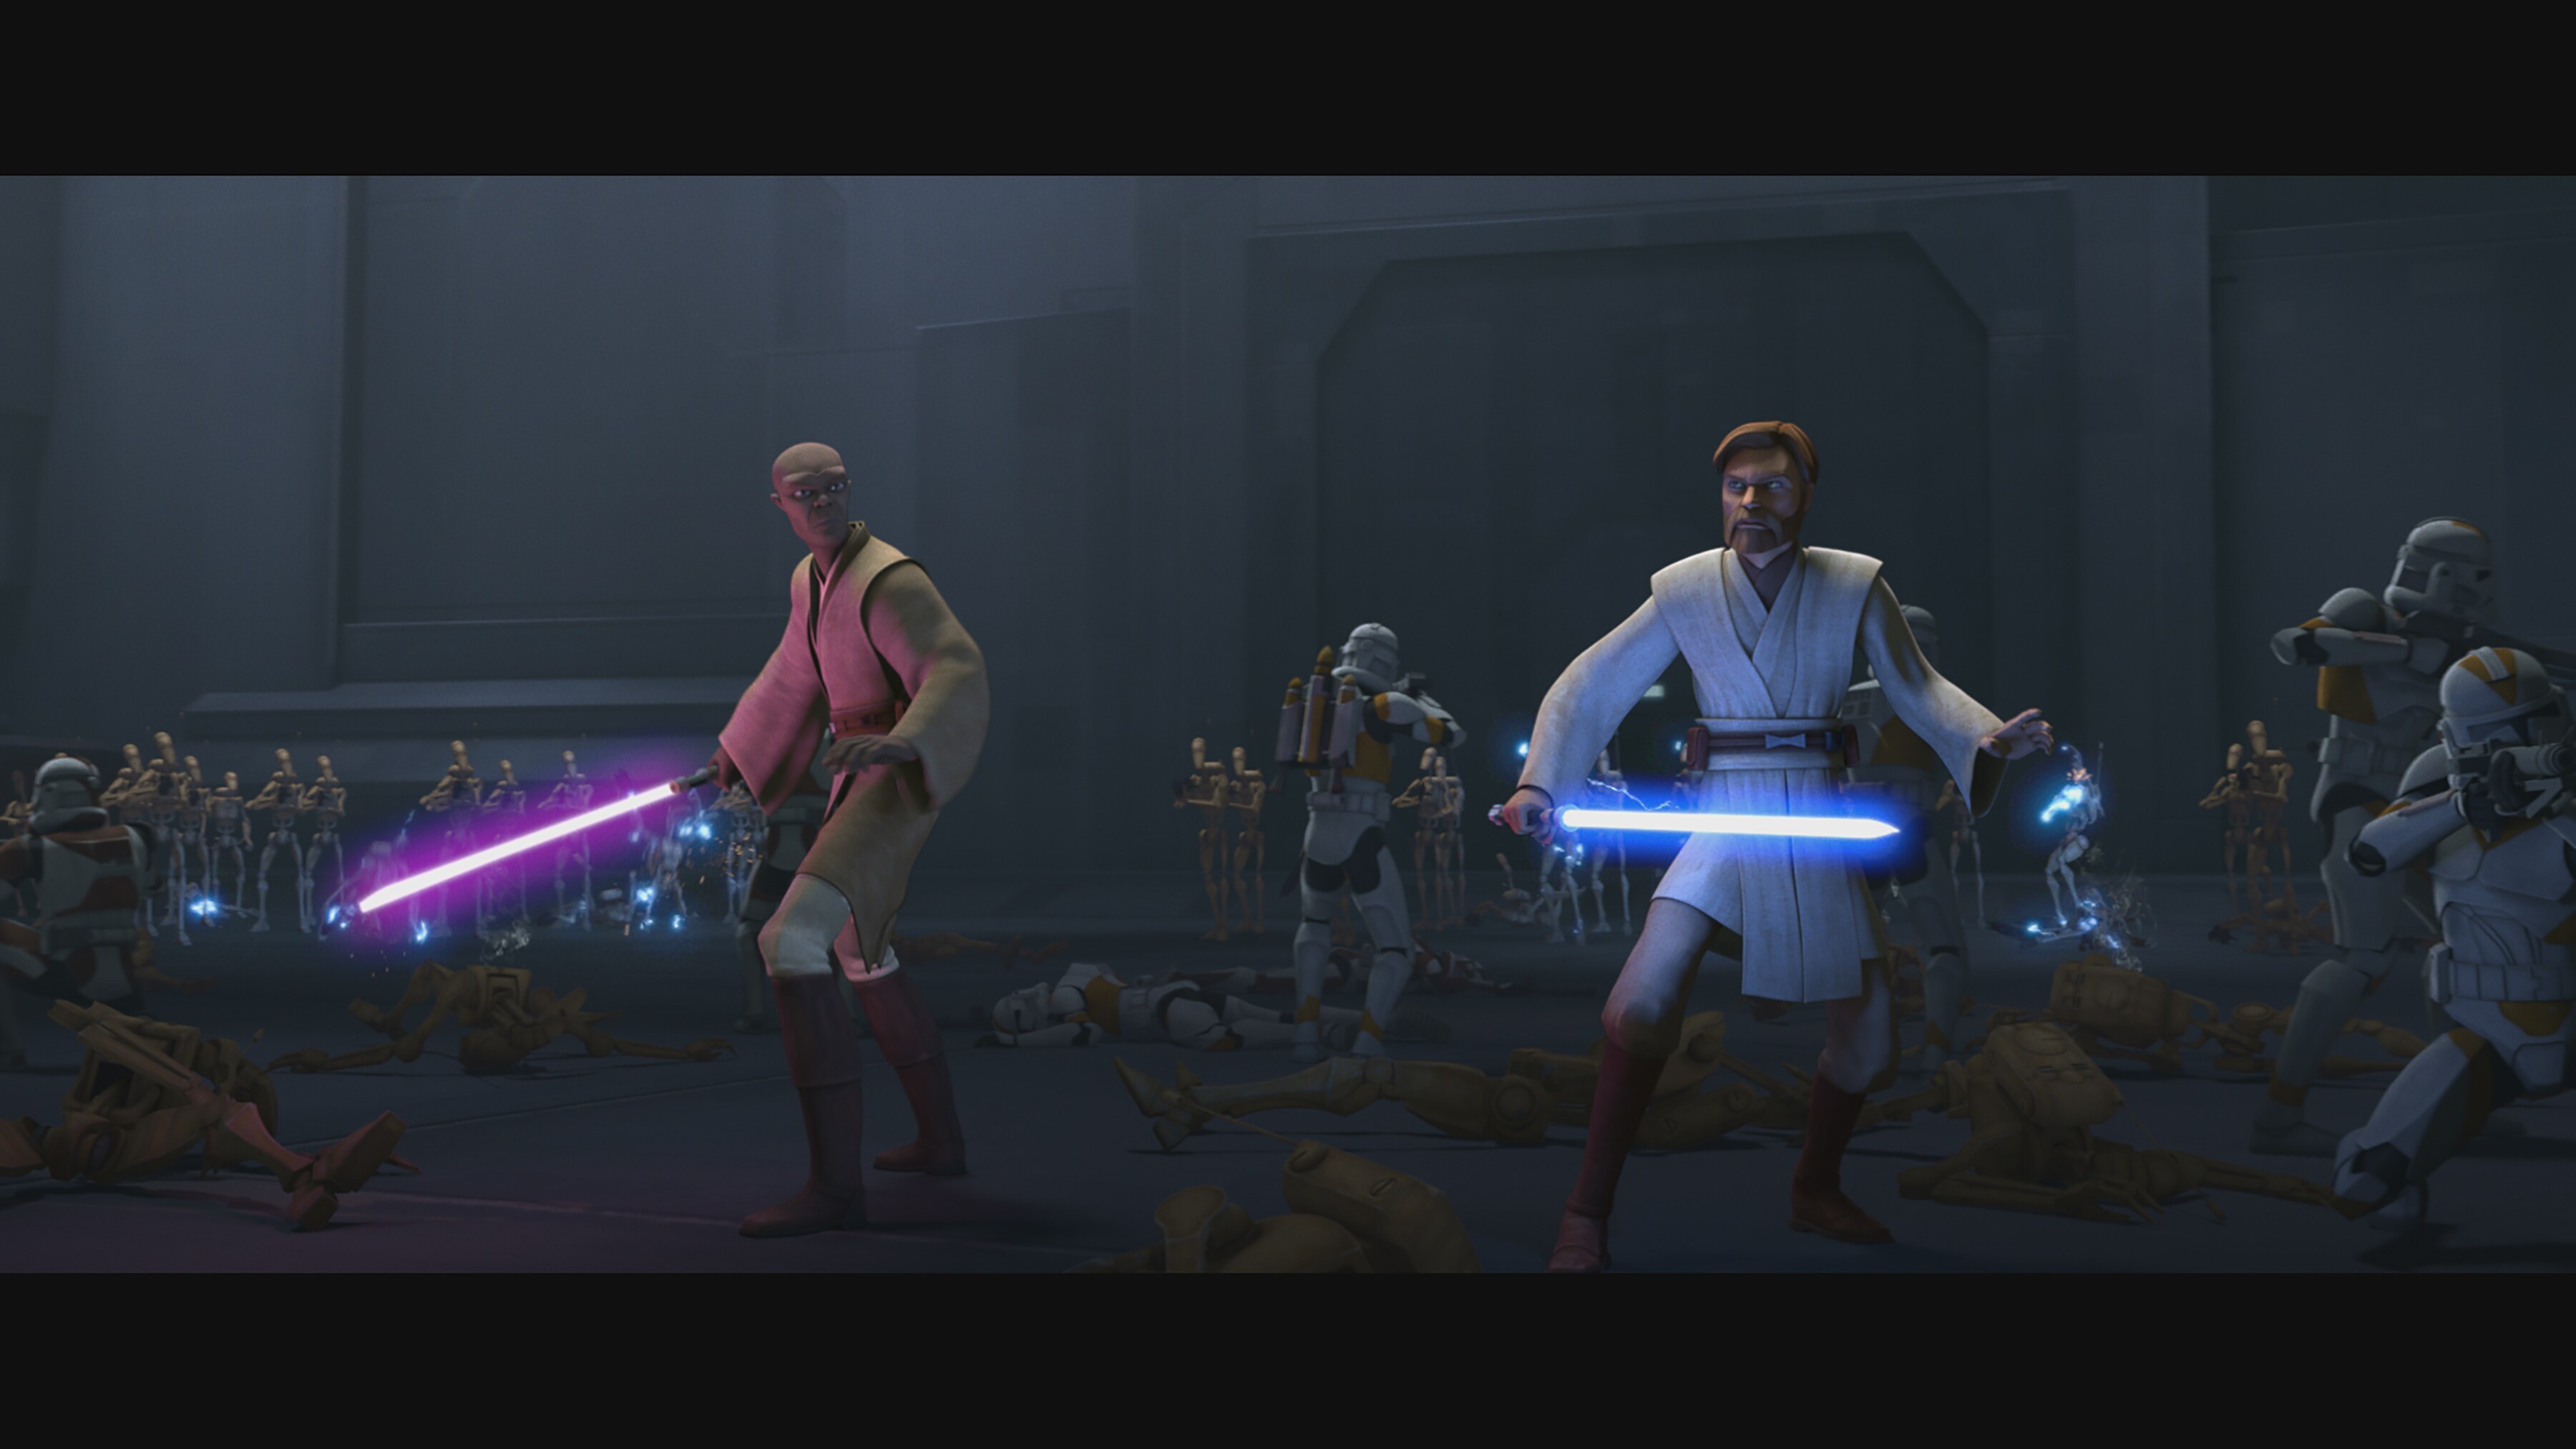 Jedi Mace Windu and Obi-Wan Kenobi lead an attack against Separatist forces in STAR WARS: THE CLONE WARS, exclusively on Disney+.